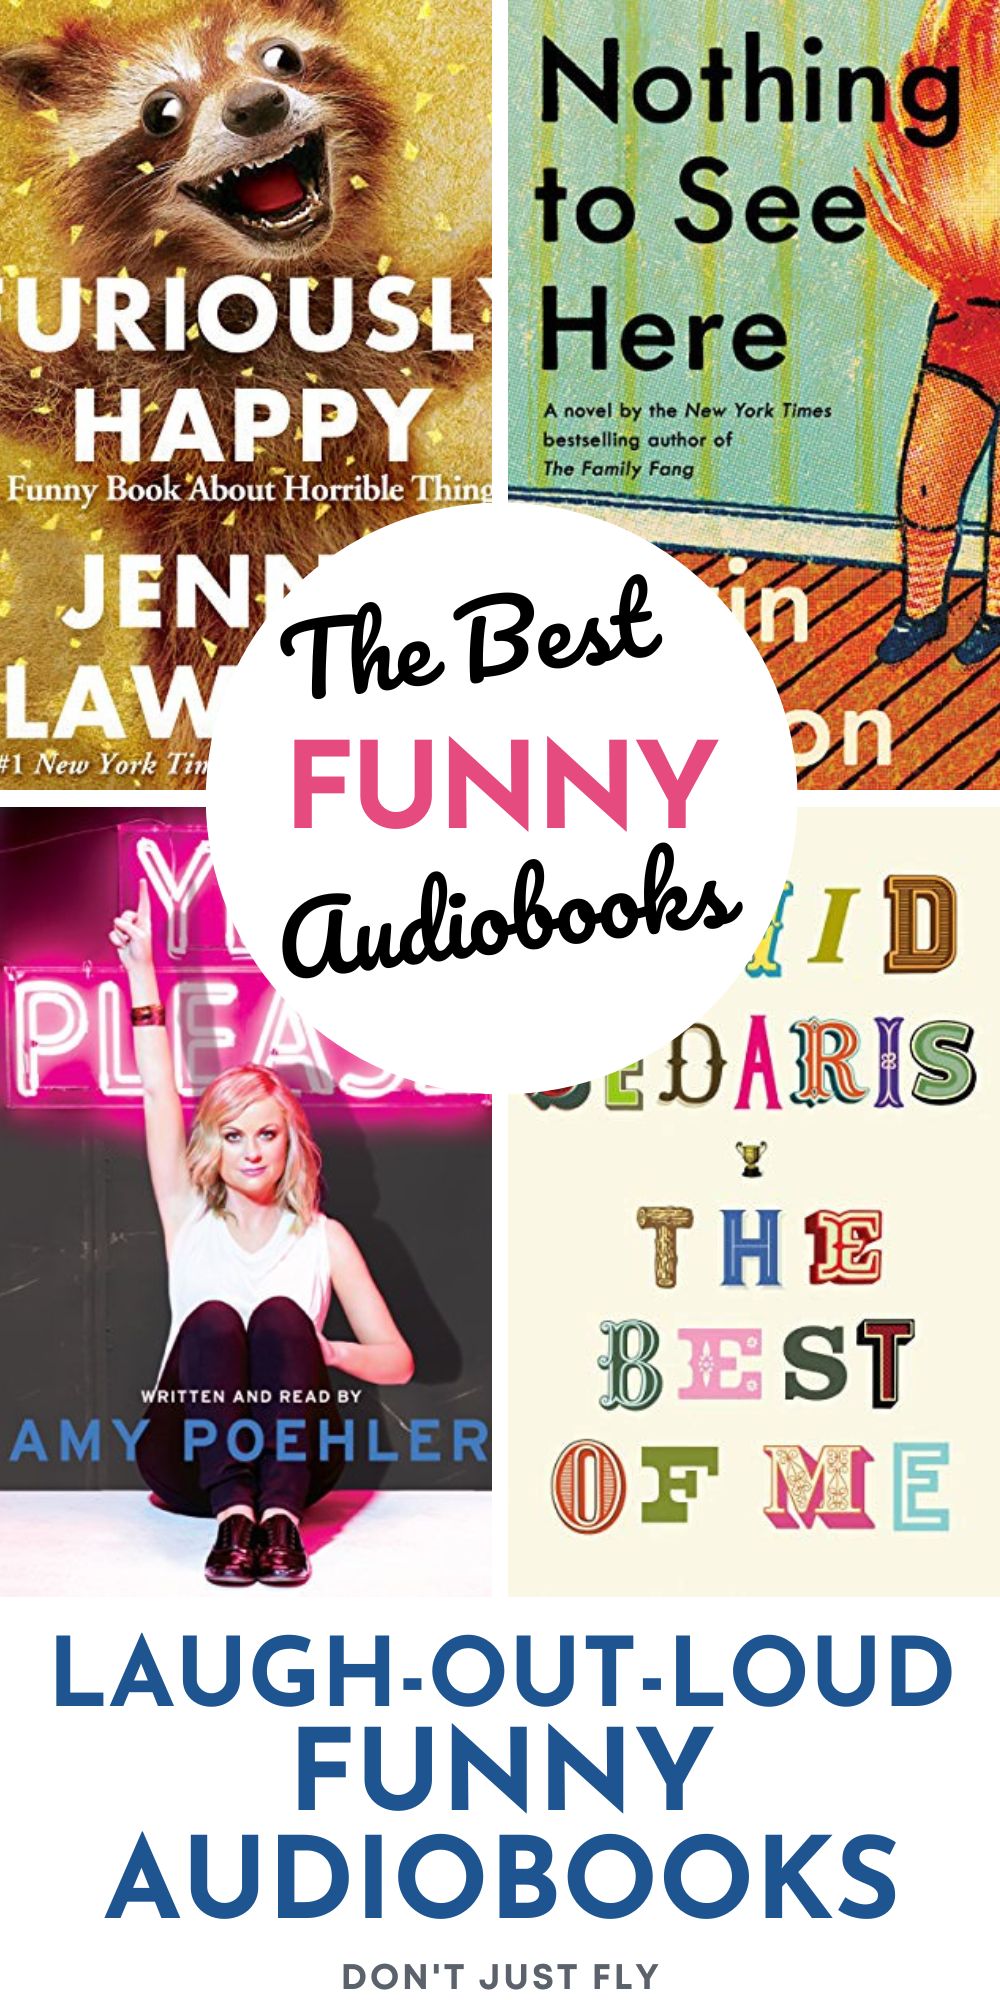 A photo collage shows several laugh-out-loud funny audiobooks for road trips.